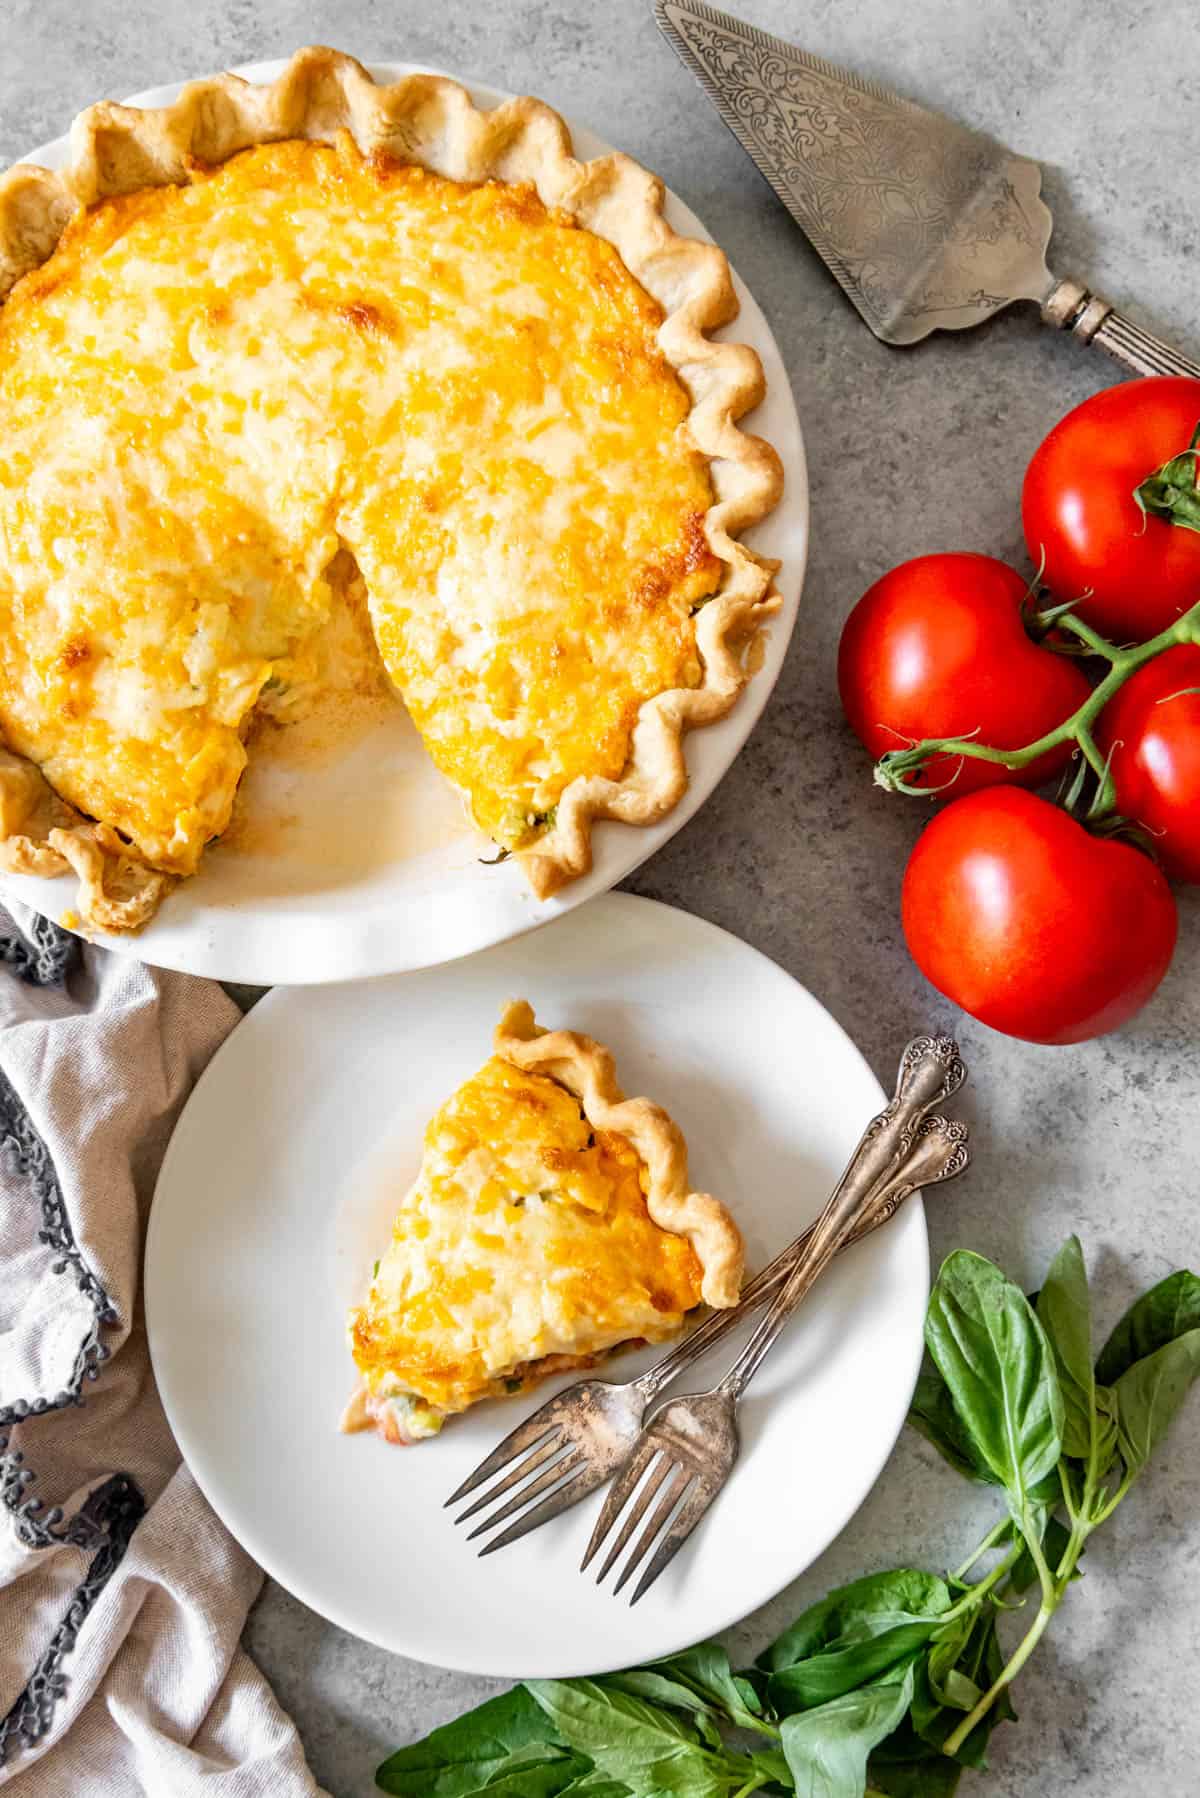 An image of a cheese and tomato pie with one slice removed and set on a white plate next to summer-ripe tomatoes and fresh basil.